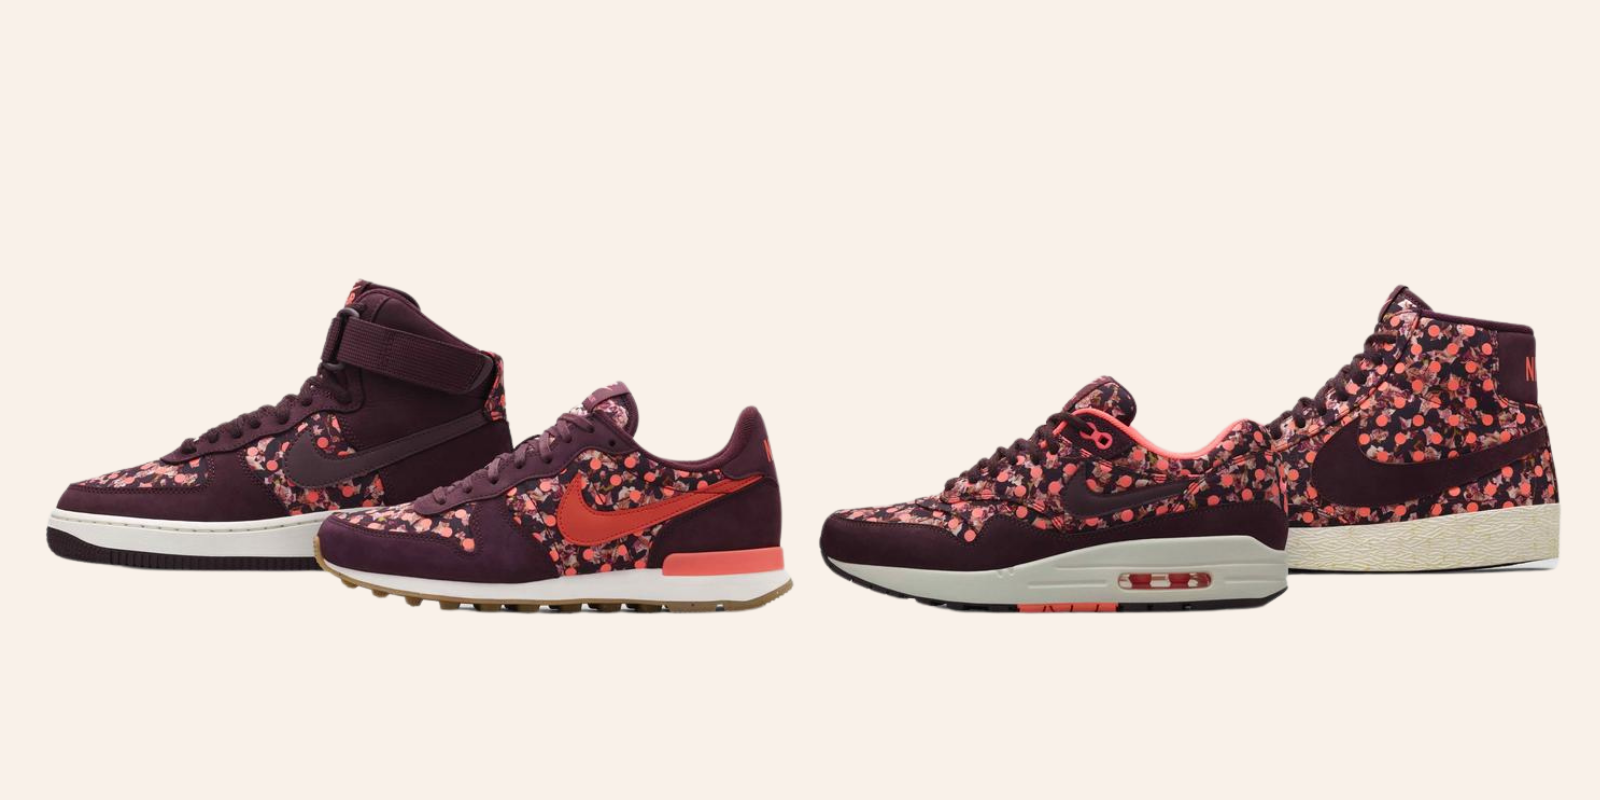 Nike x Liberty London: The Very British AW14 Collection